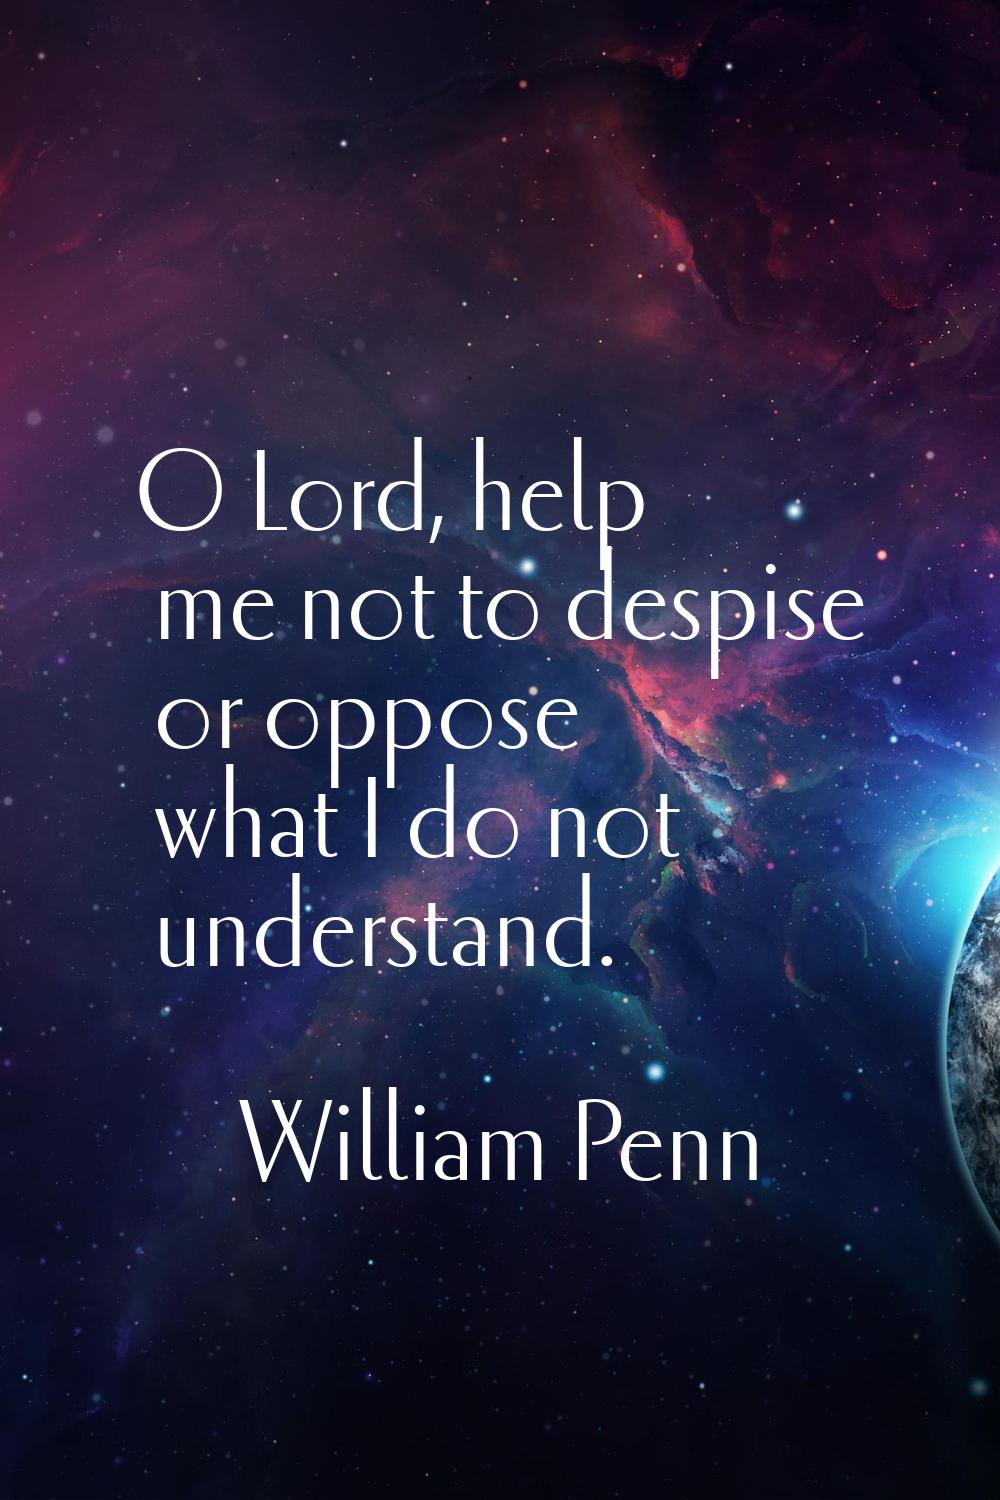 O Lord, help me not to despise or oppose what I do not understand.